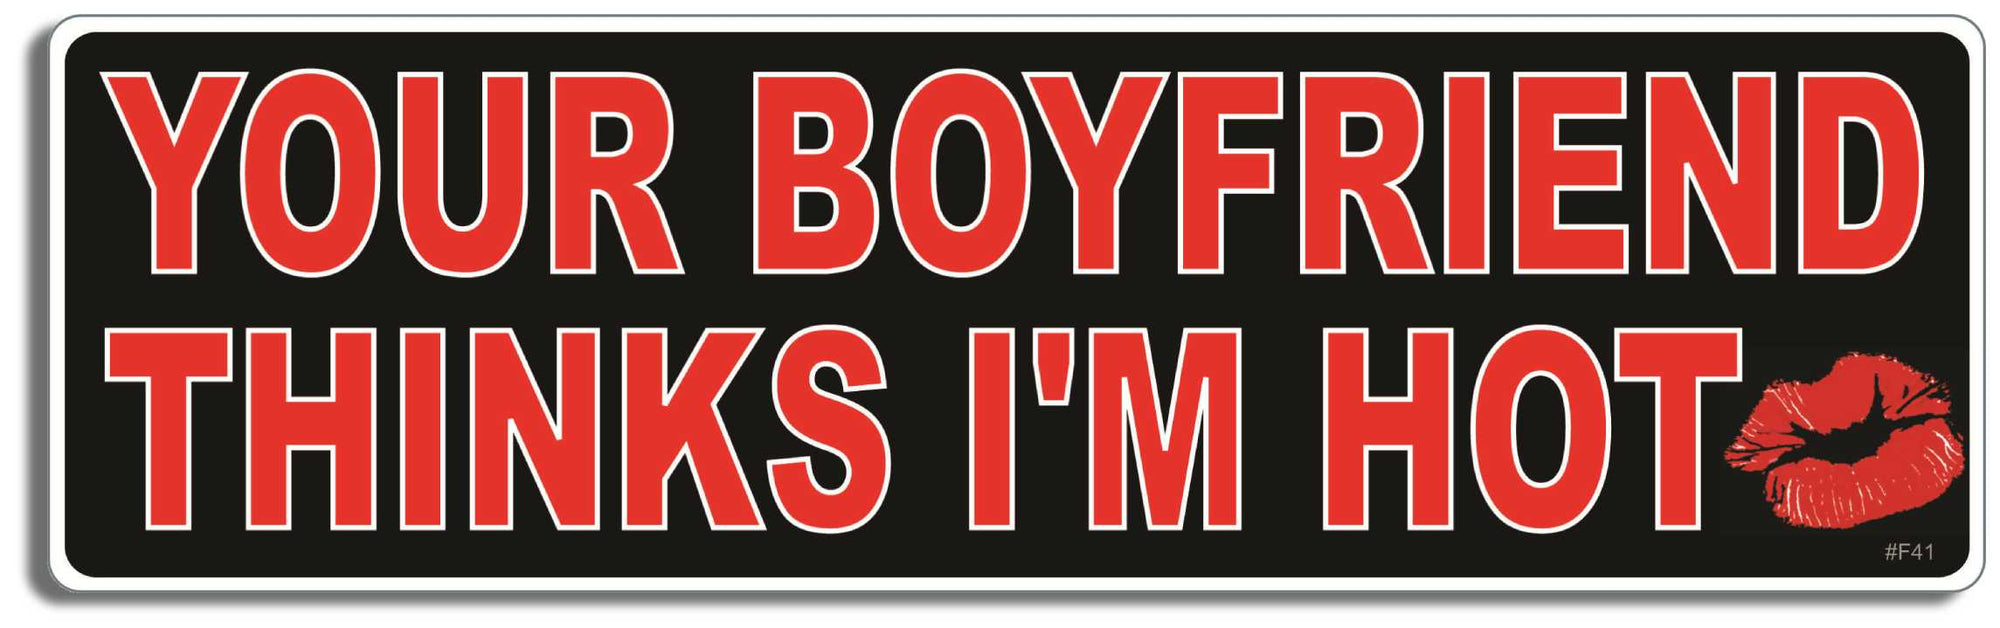 Your boyfriend thinks i'm hot - 3" x 10" Bumper Sticker--Car Magnet- -  Decal Bumper Sticker-funny Bumper Sticker Car Magnet Your boyfriend thinks i'm hot-  Decal for cars funny, funny quote, funny saying